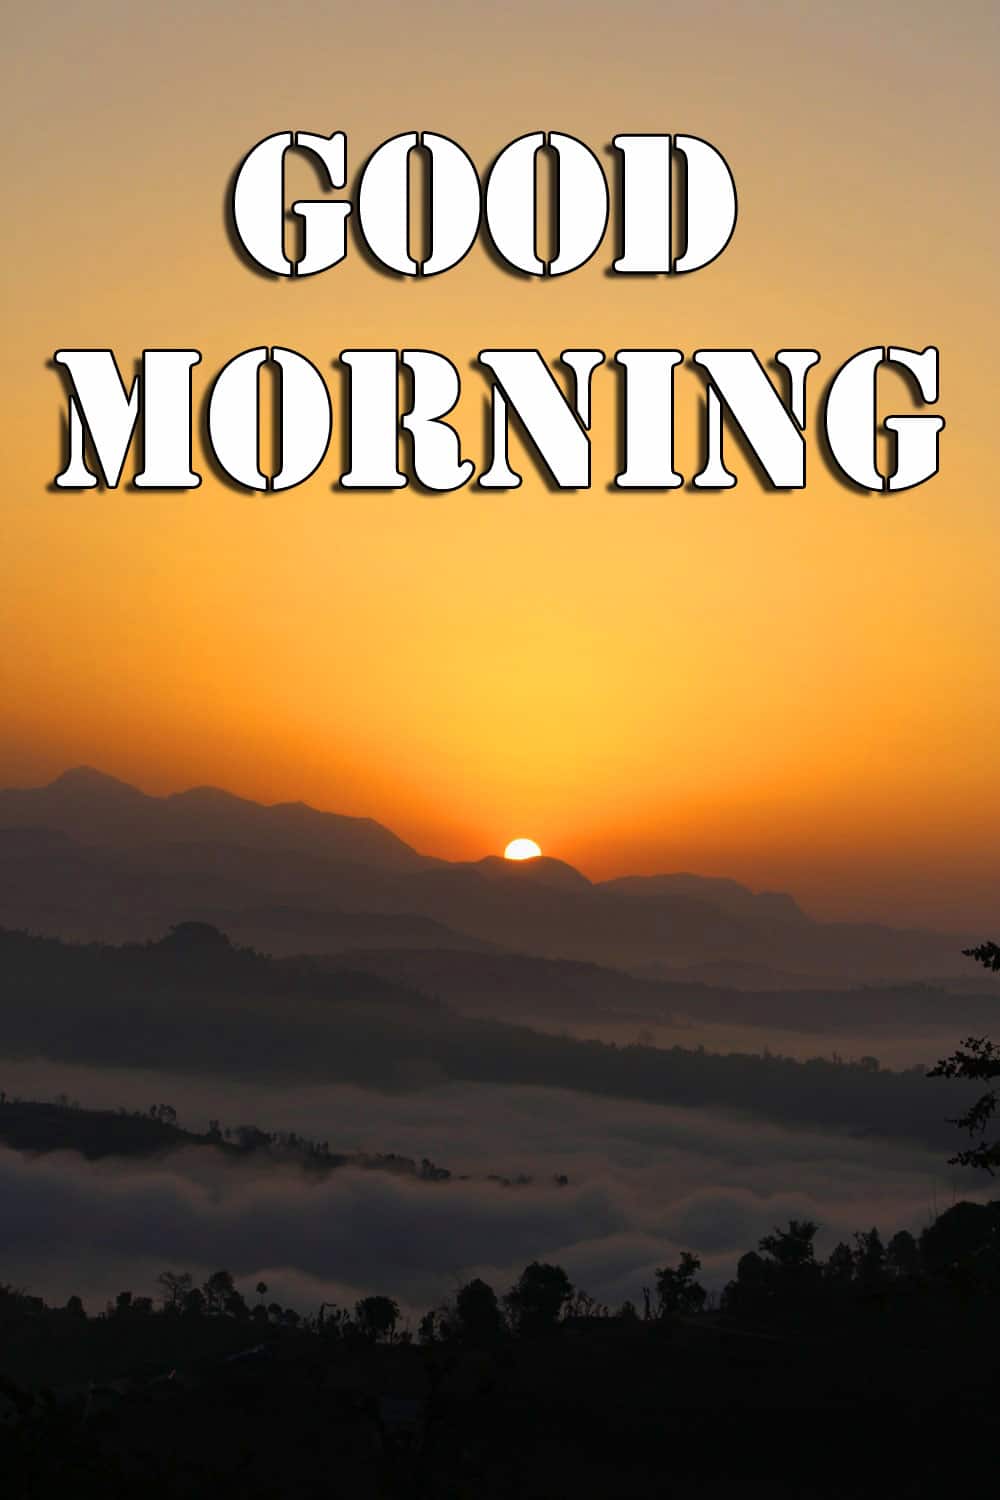 Good Morning Wishes photo Pics Download